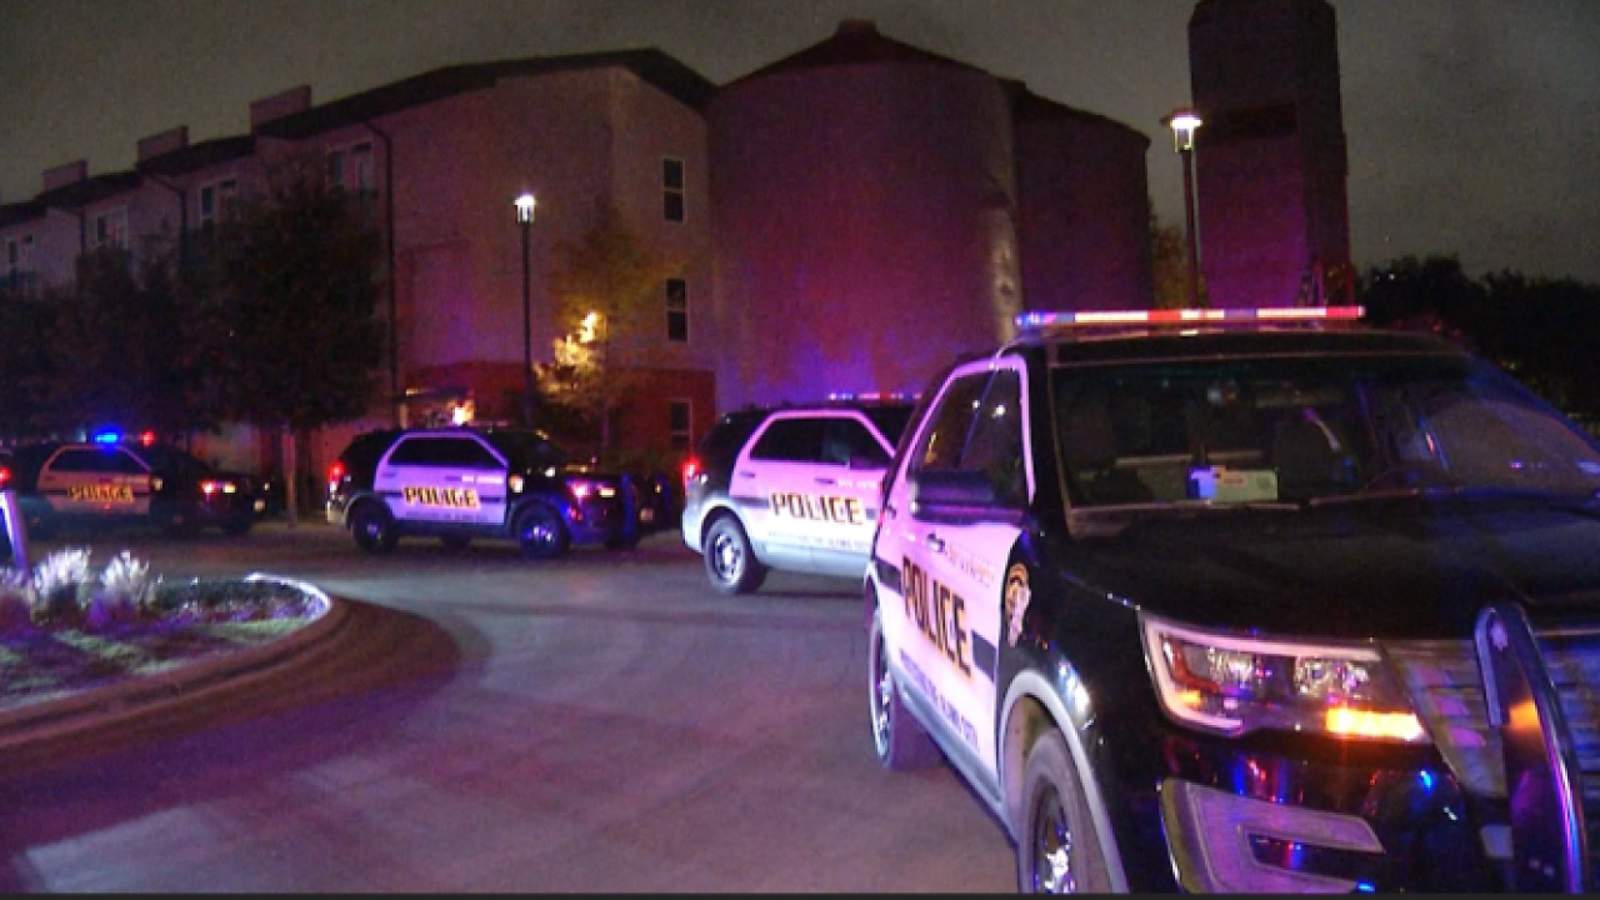 Man who broke into apartment shot, killed by neighbor, police say